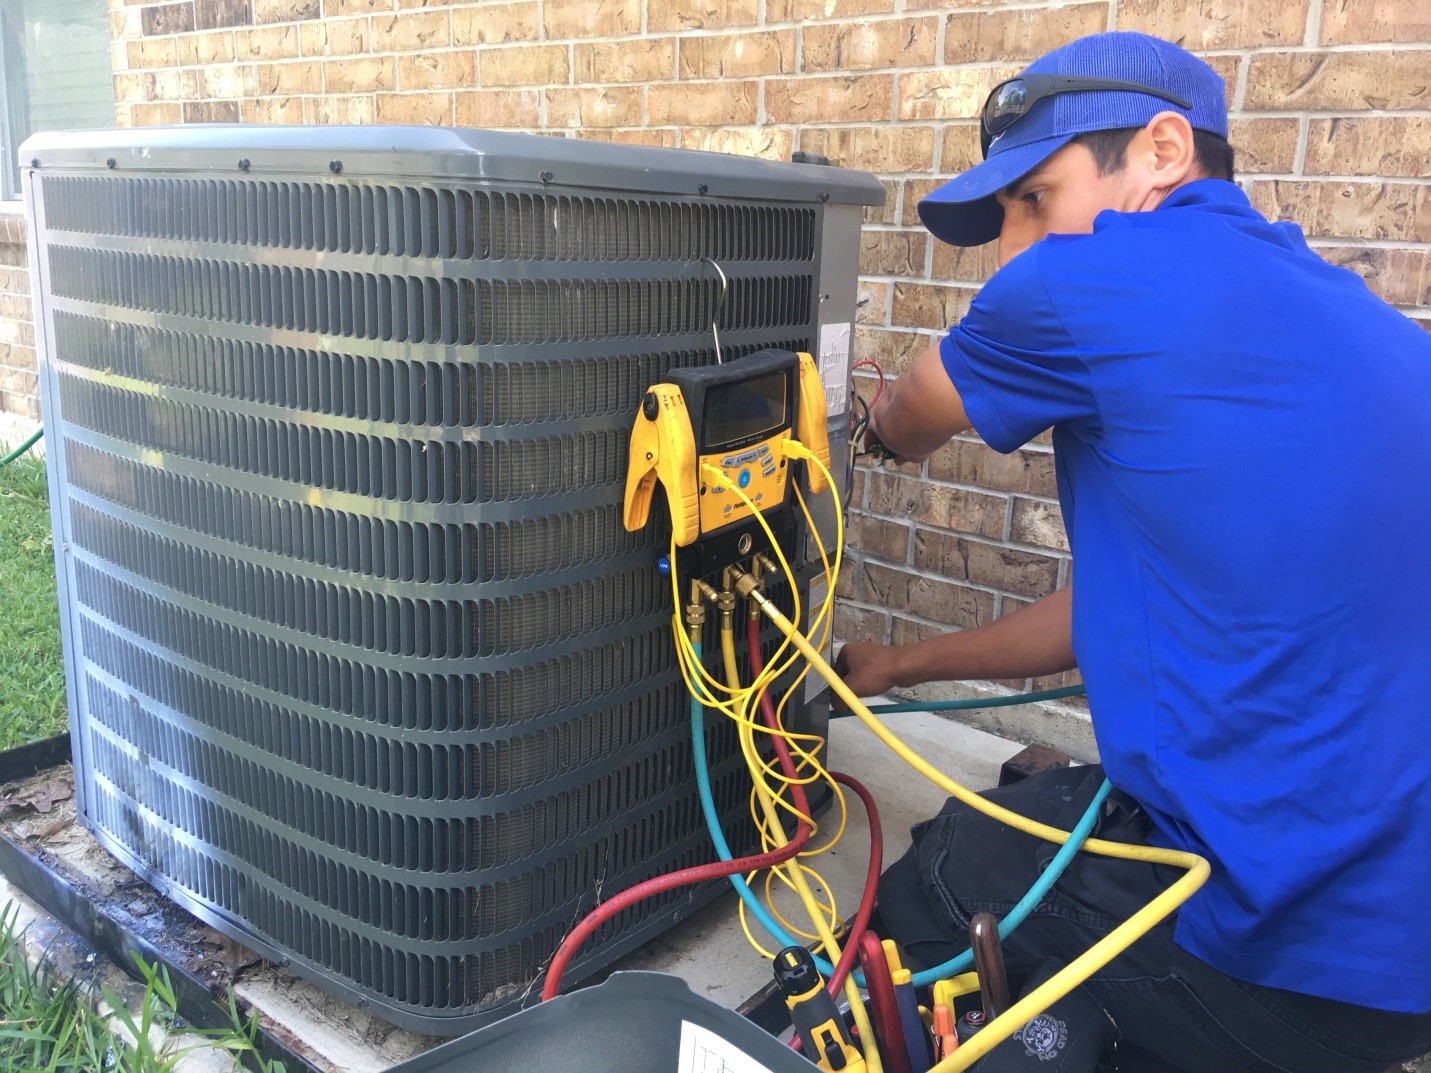 An installation technician from Fresh Air in Houston installs a new Carrier air conditioner at a Habitat for Humanity home earlier this year. The home was flooded by the historic rain that impacted thousands of homes across the Houston area last year during Hurricane Harvey. Carrier donated 100 new air conditioners to the Houston chapter of Habitat for Humanity while Fresh Air is installing the systems for Habitat families across the Houston region.